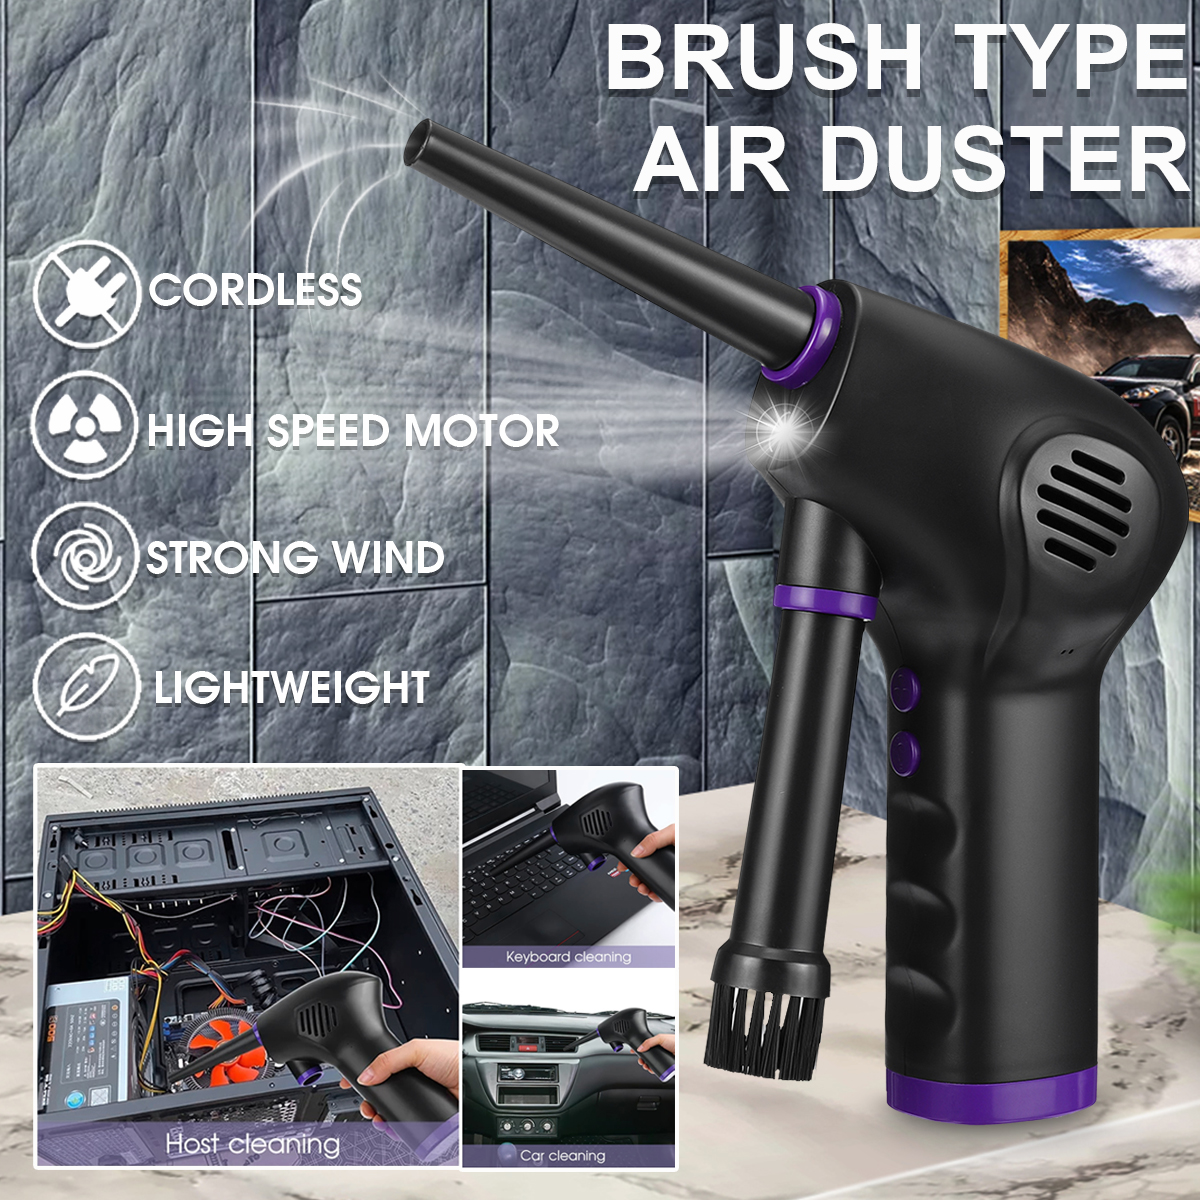 6000mAh-70ms-Cordless-Air-Duster-For-Computer-Cleaning-Replaces-Compressed-Spray-Gas-Cans-Rechargeab-1902465-5